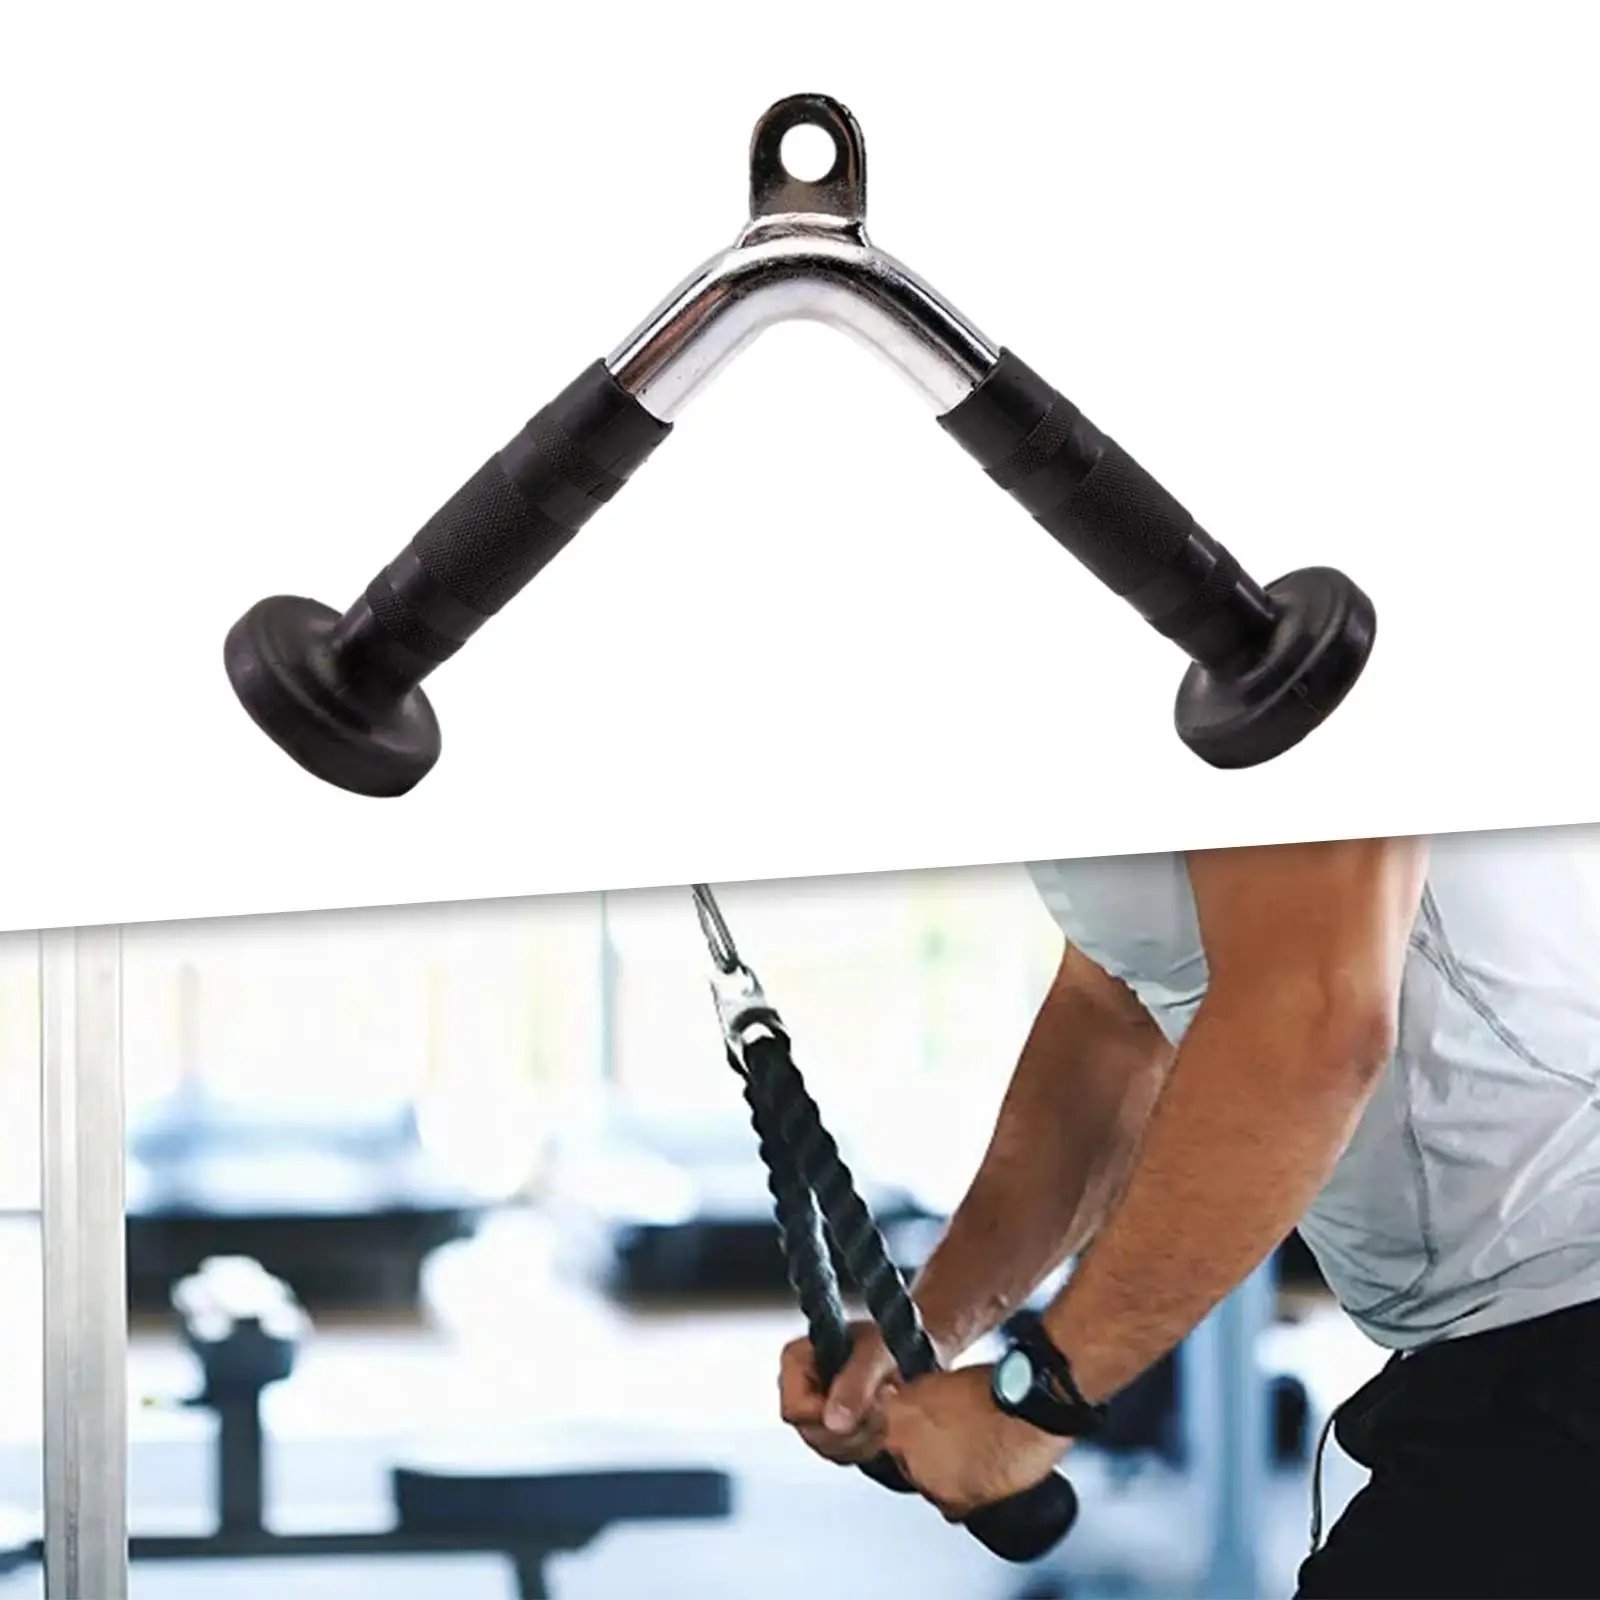 Tricep Press Push Down Bar Tricep Press V Shaped Bar for Strength Training Shoulder Biceps Exercise Fitness Weightlifting Rowing